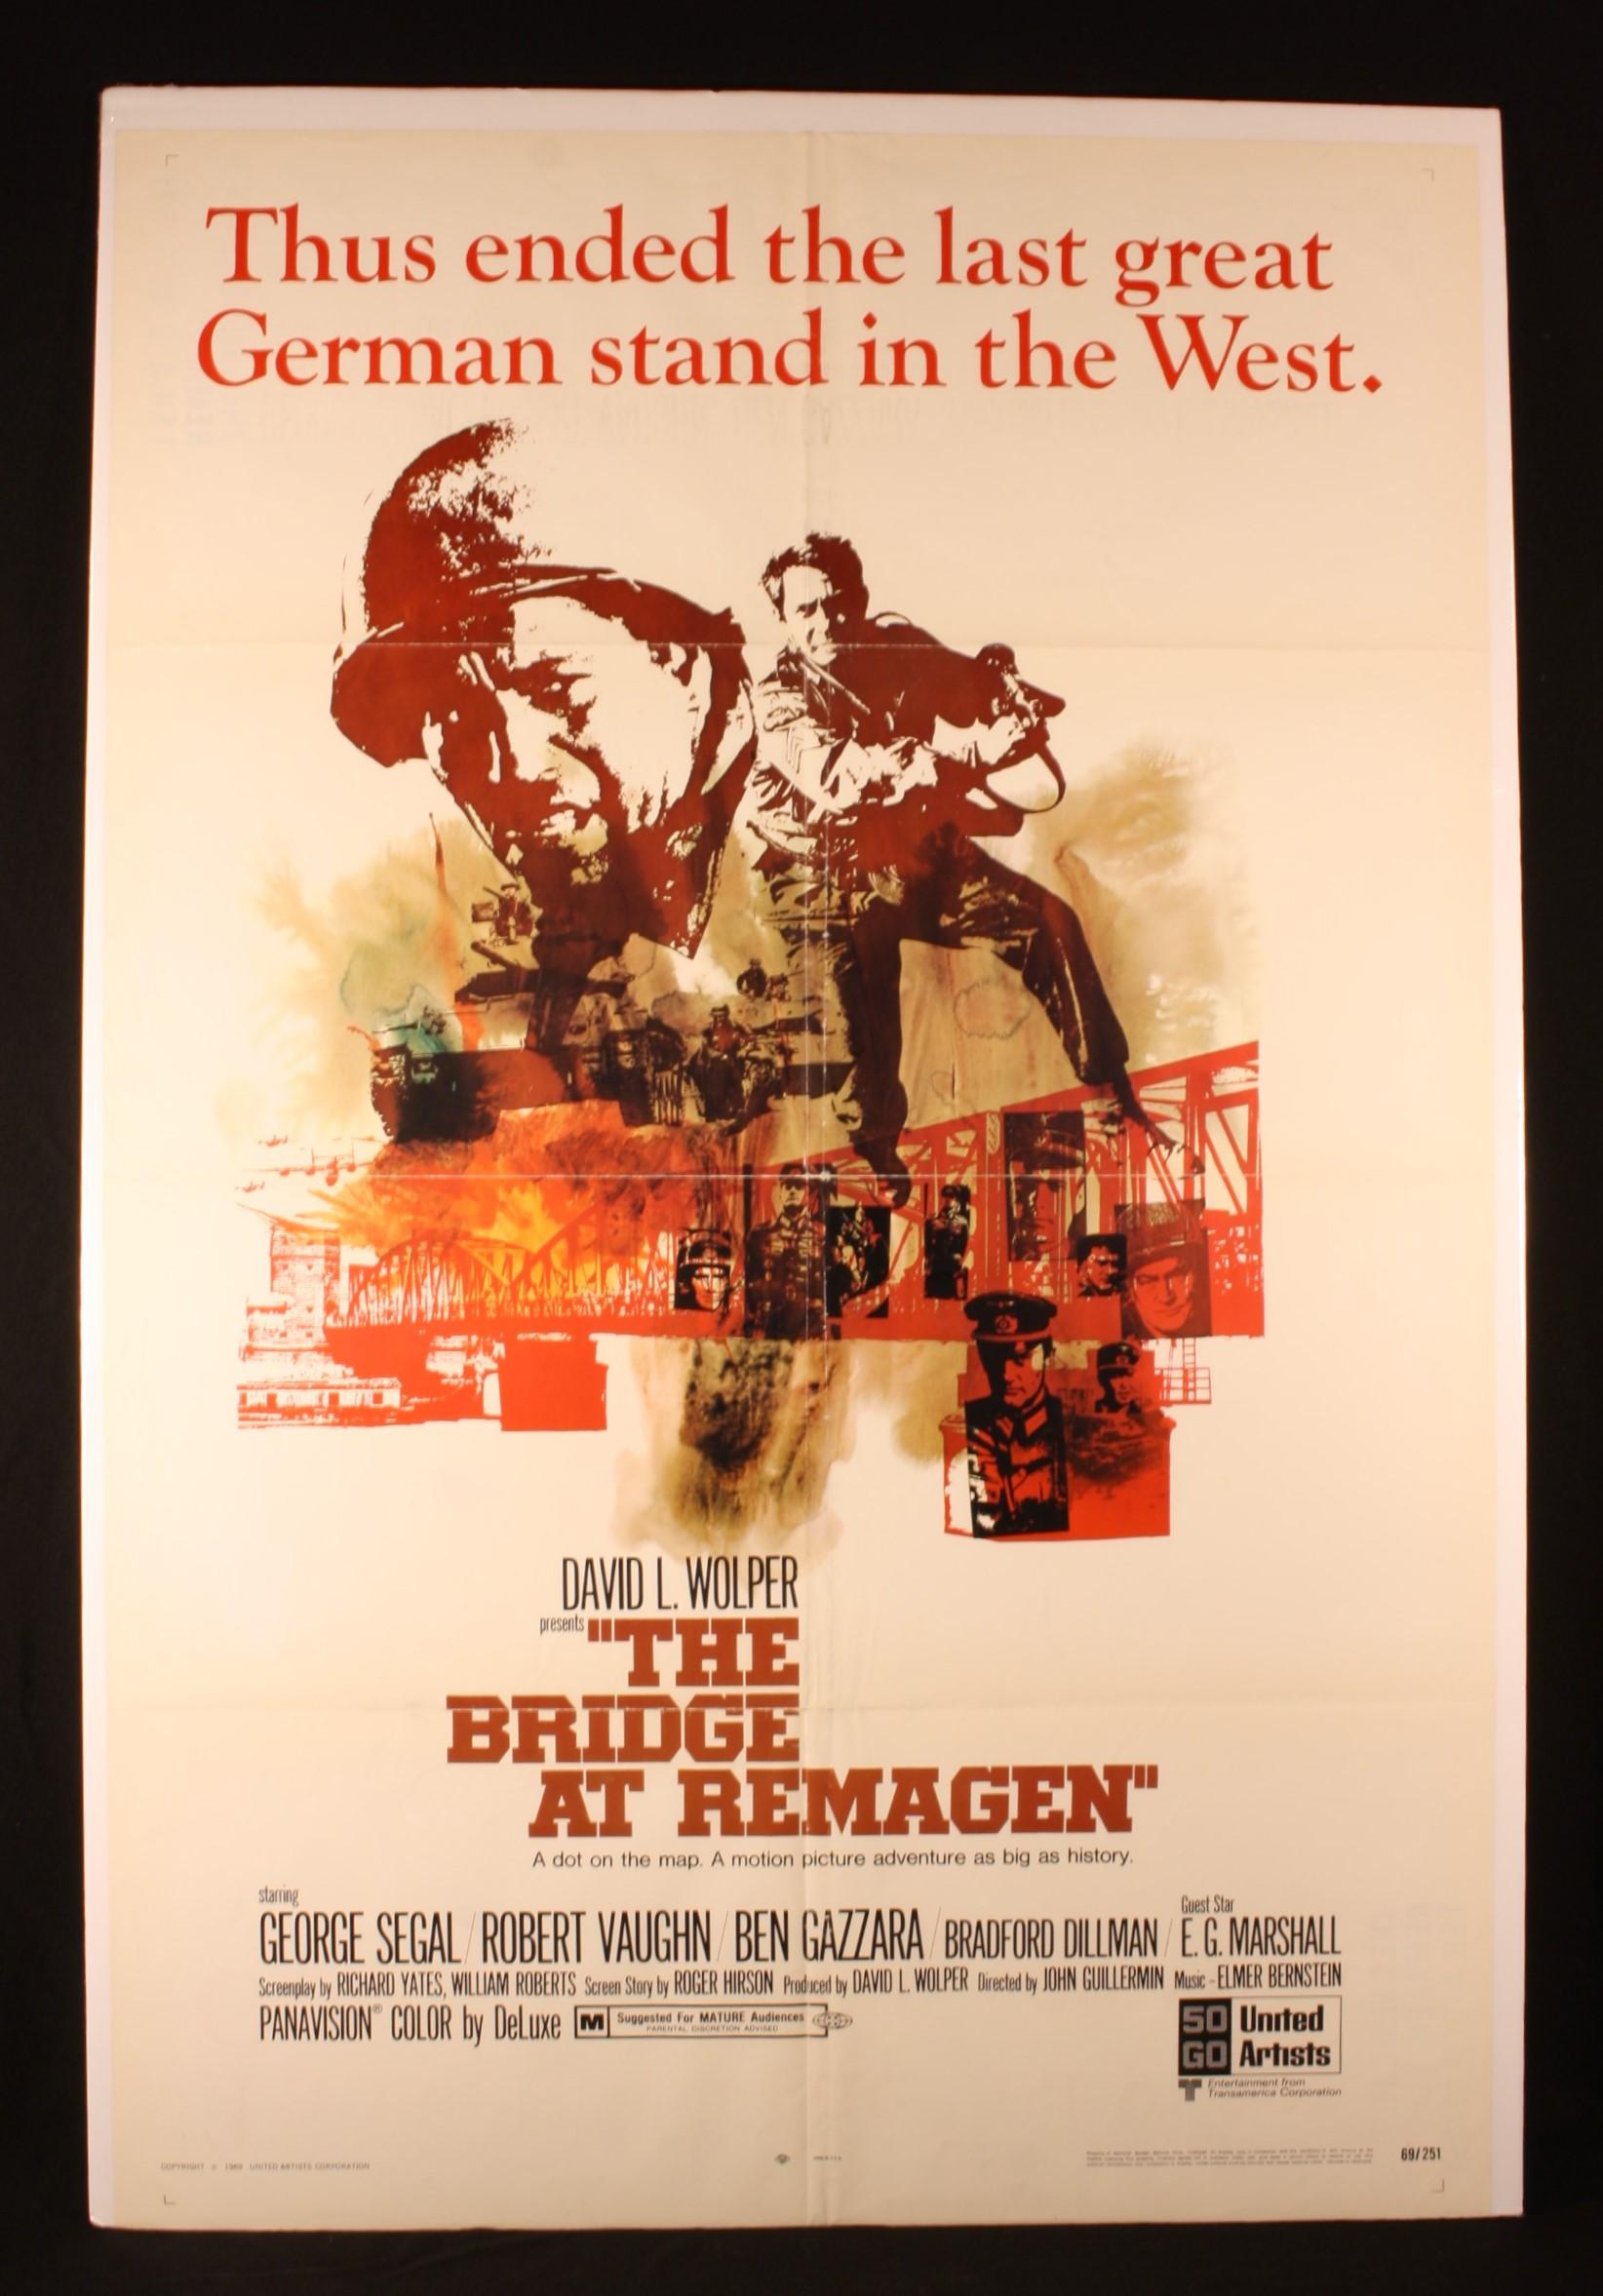 1969 “The Bridge at Remagen” one sheet movie poster.